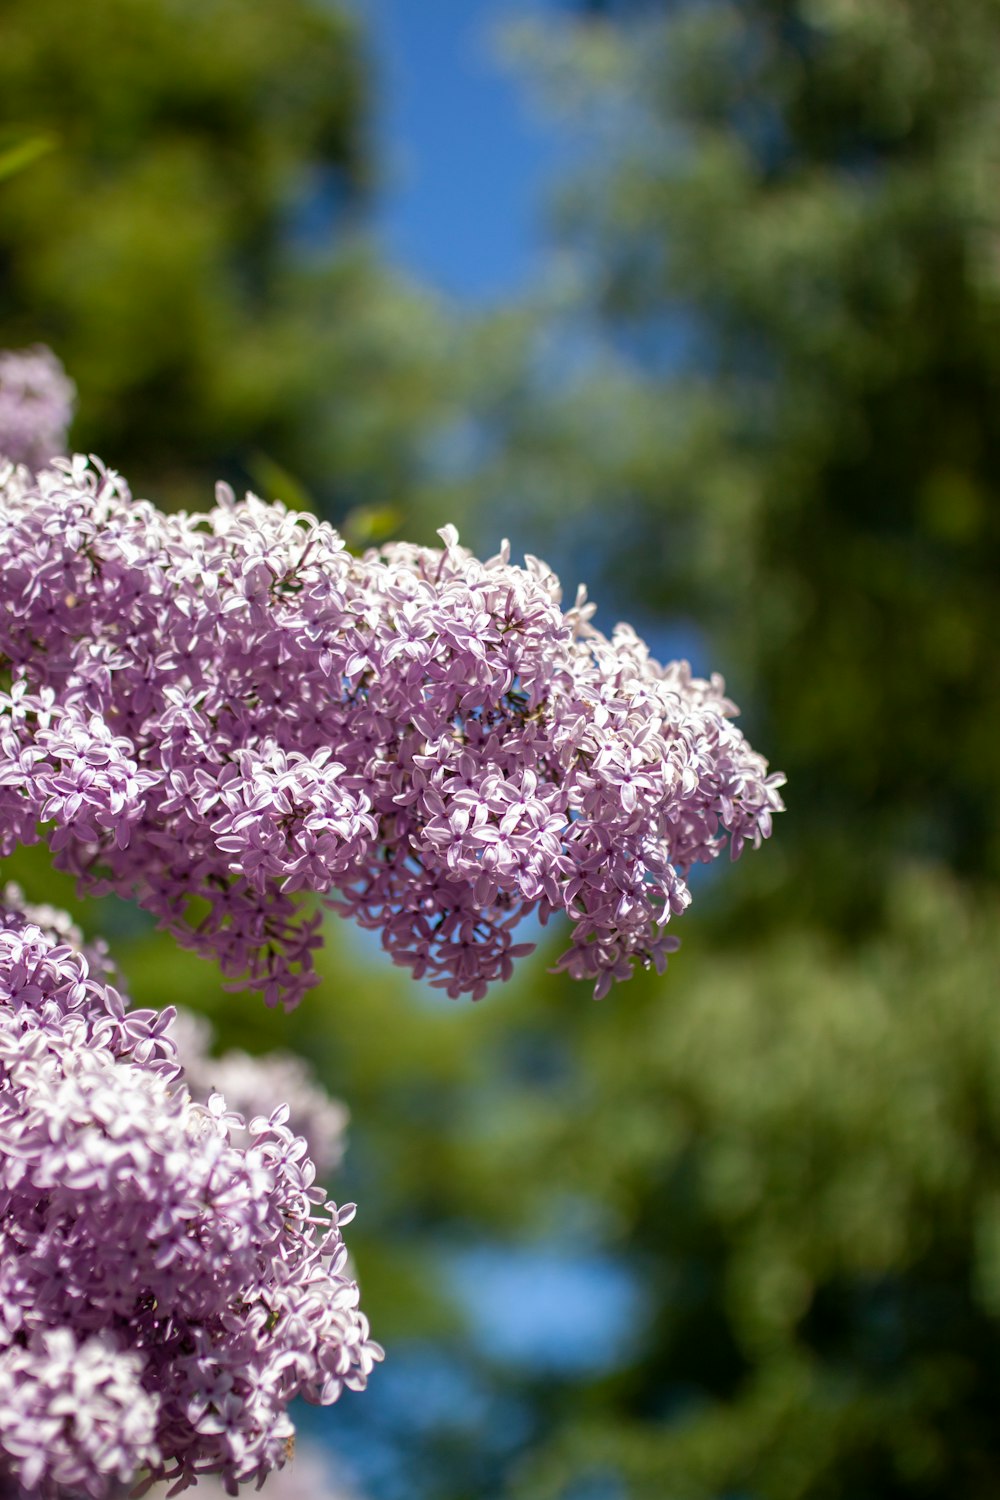 a close up of a purple flower with trees in the background